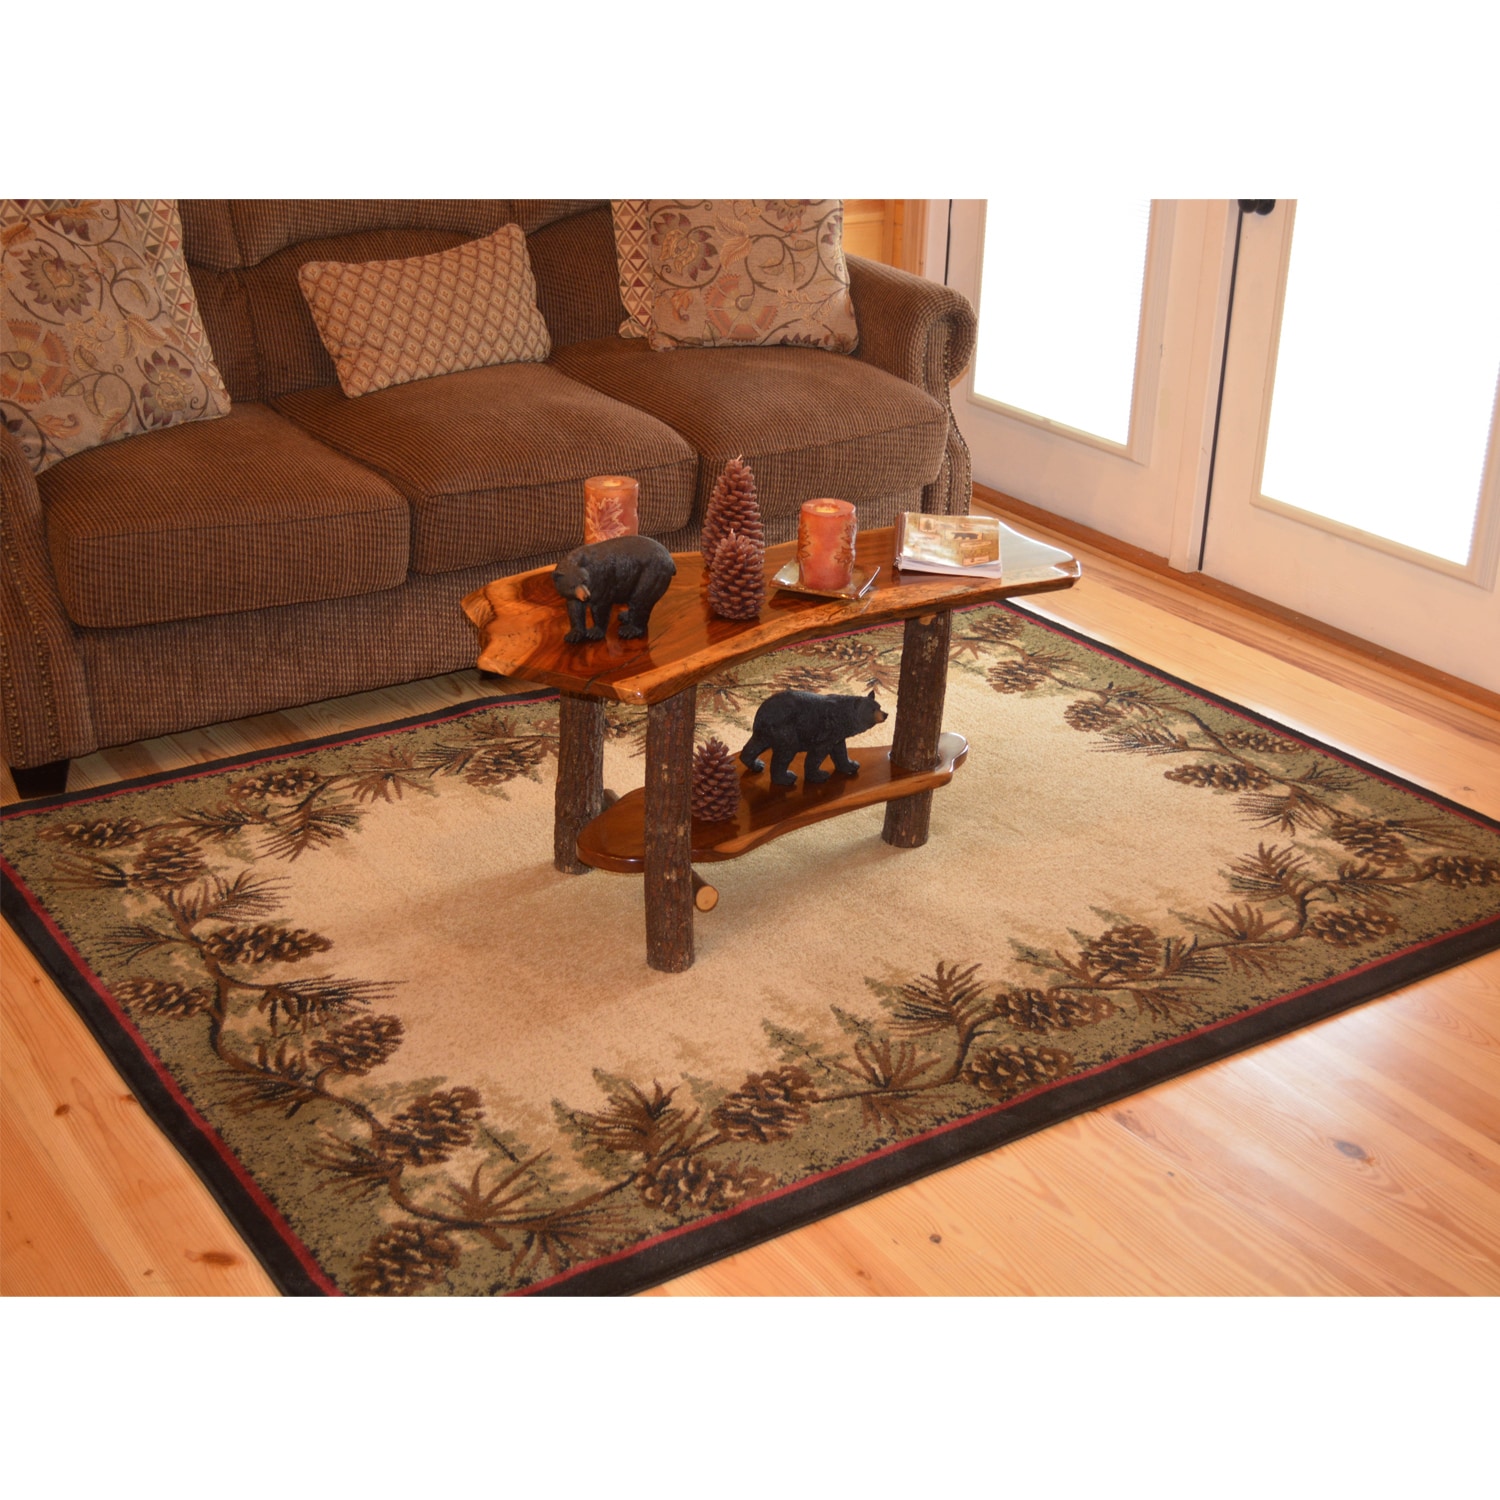 Lodge Cabin Rustic Pine Beige Area Rug FREE SHIPPING Sisal Seagrass Area Rugs Rugs Carpets